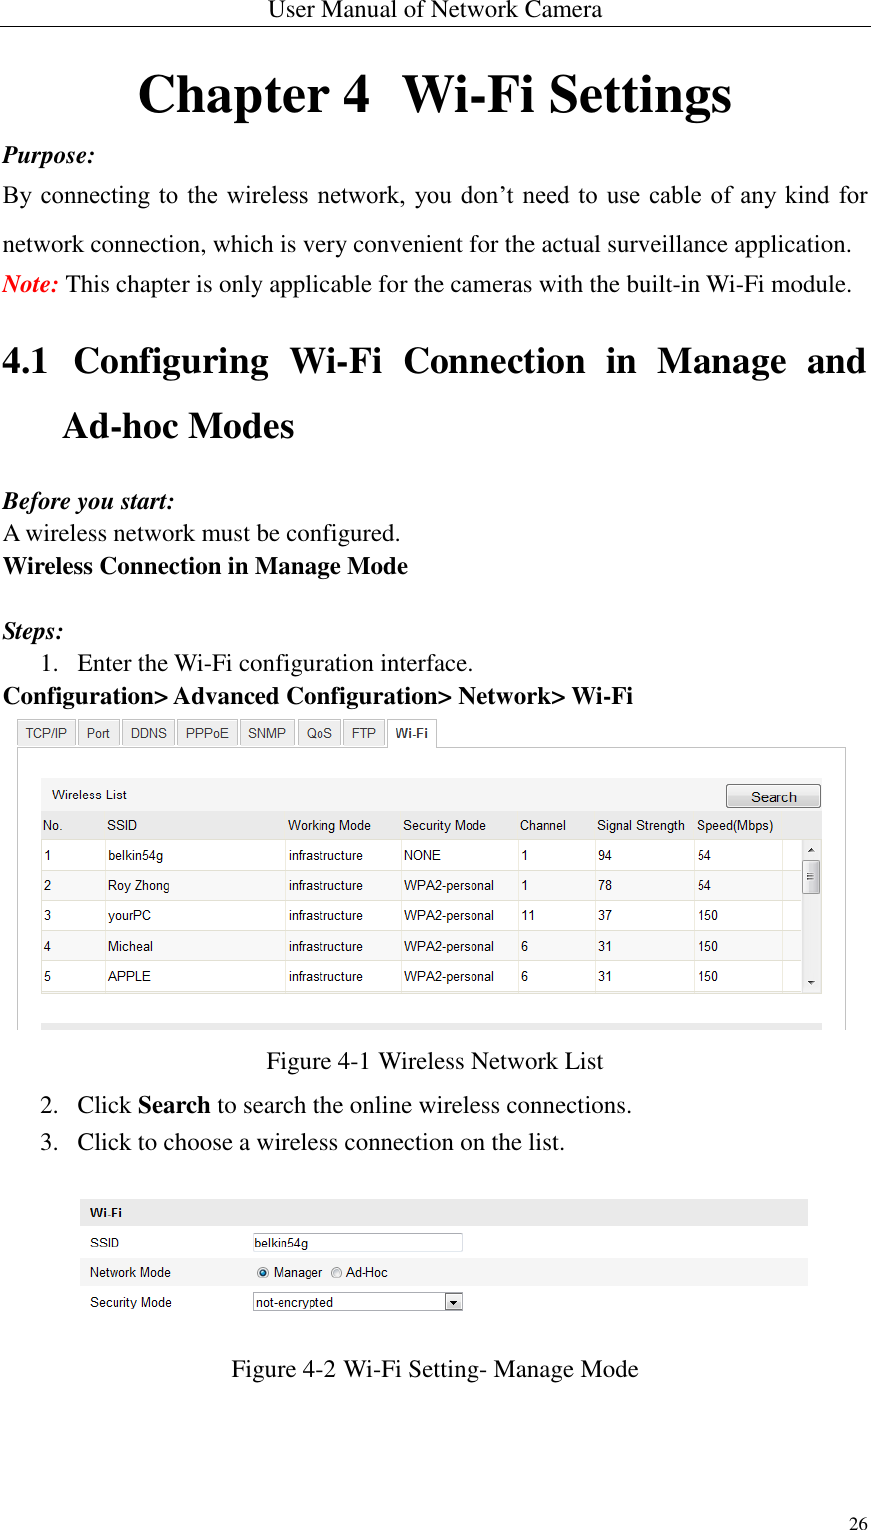 User Manual of Network Camera 26  Chapter 4  Wi-Fi Settings Purpose: By connecting to the  wireless network, you don’t need to use  cable of  any kind  for network connection, which is very convenient for the actual surveillance application. Note: This chapter is only applicable for the cameras with the built-in Wi-Fi module. 4.1 Configuring  Wi-Fi  Connection  in  Manage  and Ad-hoc Modes Before you start: A wireless network must be configured.   Wireless Connection in Manage Mode  Steps: 1. Enter the Wi-Fi configuration interface. Configuration&gt; Advanced Configuration&gt; Network&gt; Wi-Fi  Figure 4-1 Wireless Network List 2. Click Search to search the online wireless connections. 3. Click to choose a wireless connection on the list.  Figure 4-2 Wi-Fi Setting- Manage Mode 